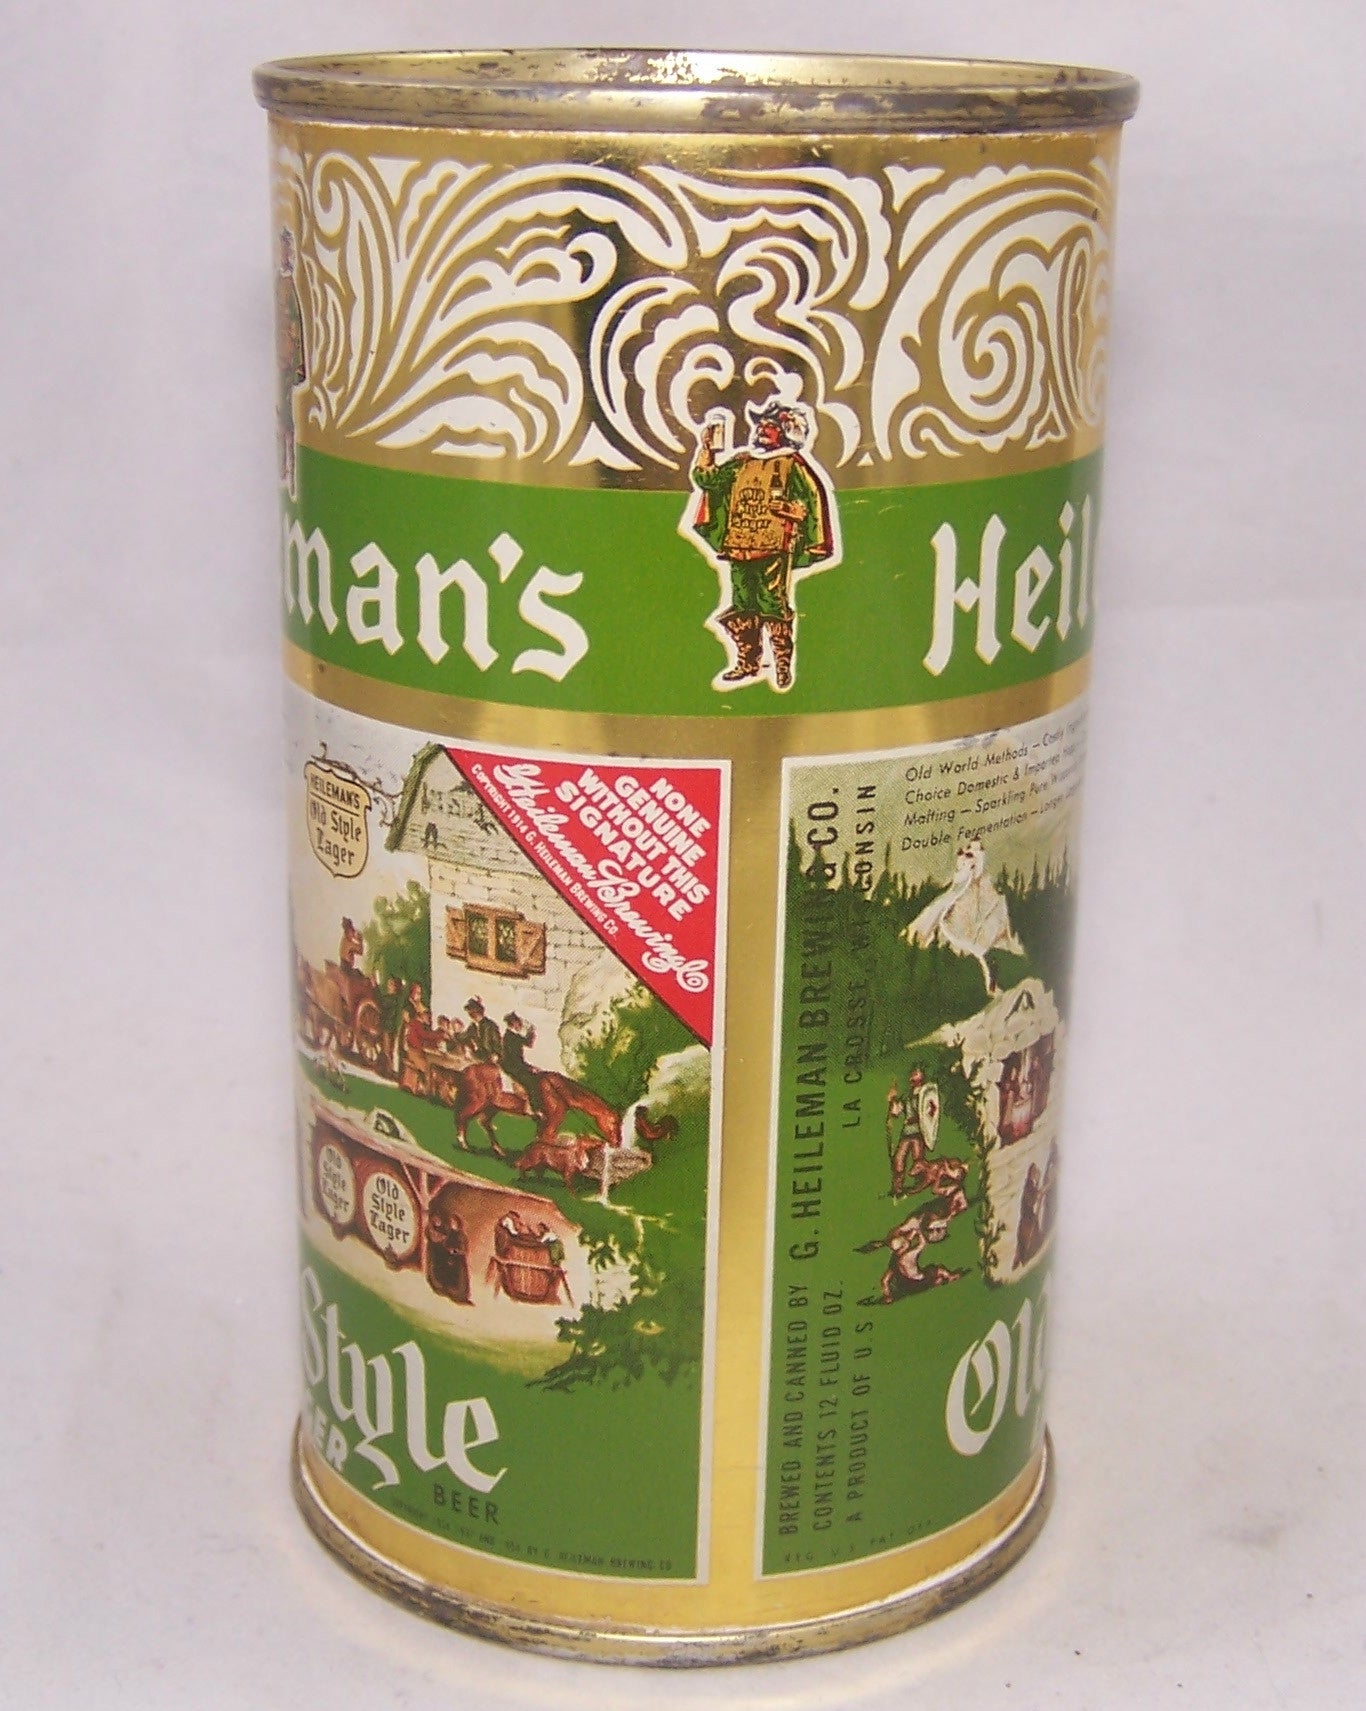 Heileman's Old Style Lager, USBC 108-14, Grade 1 or better  Sold on 12/26/16